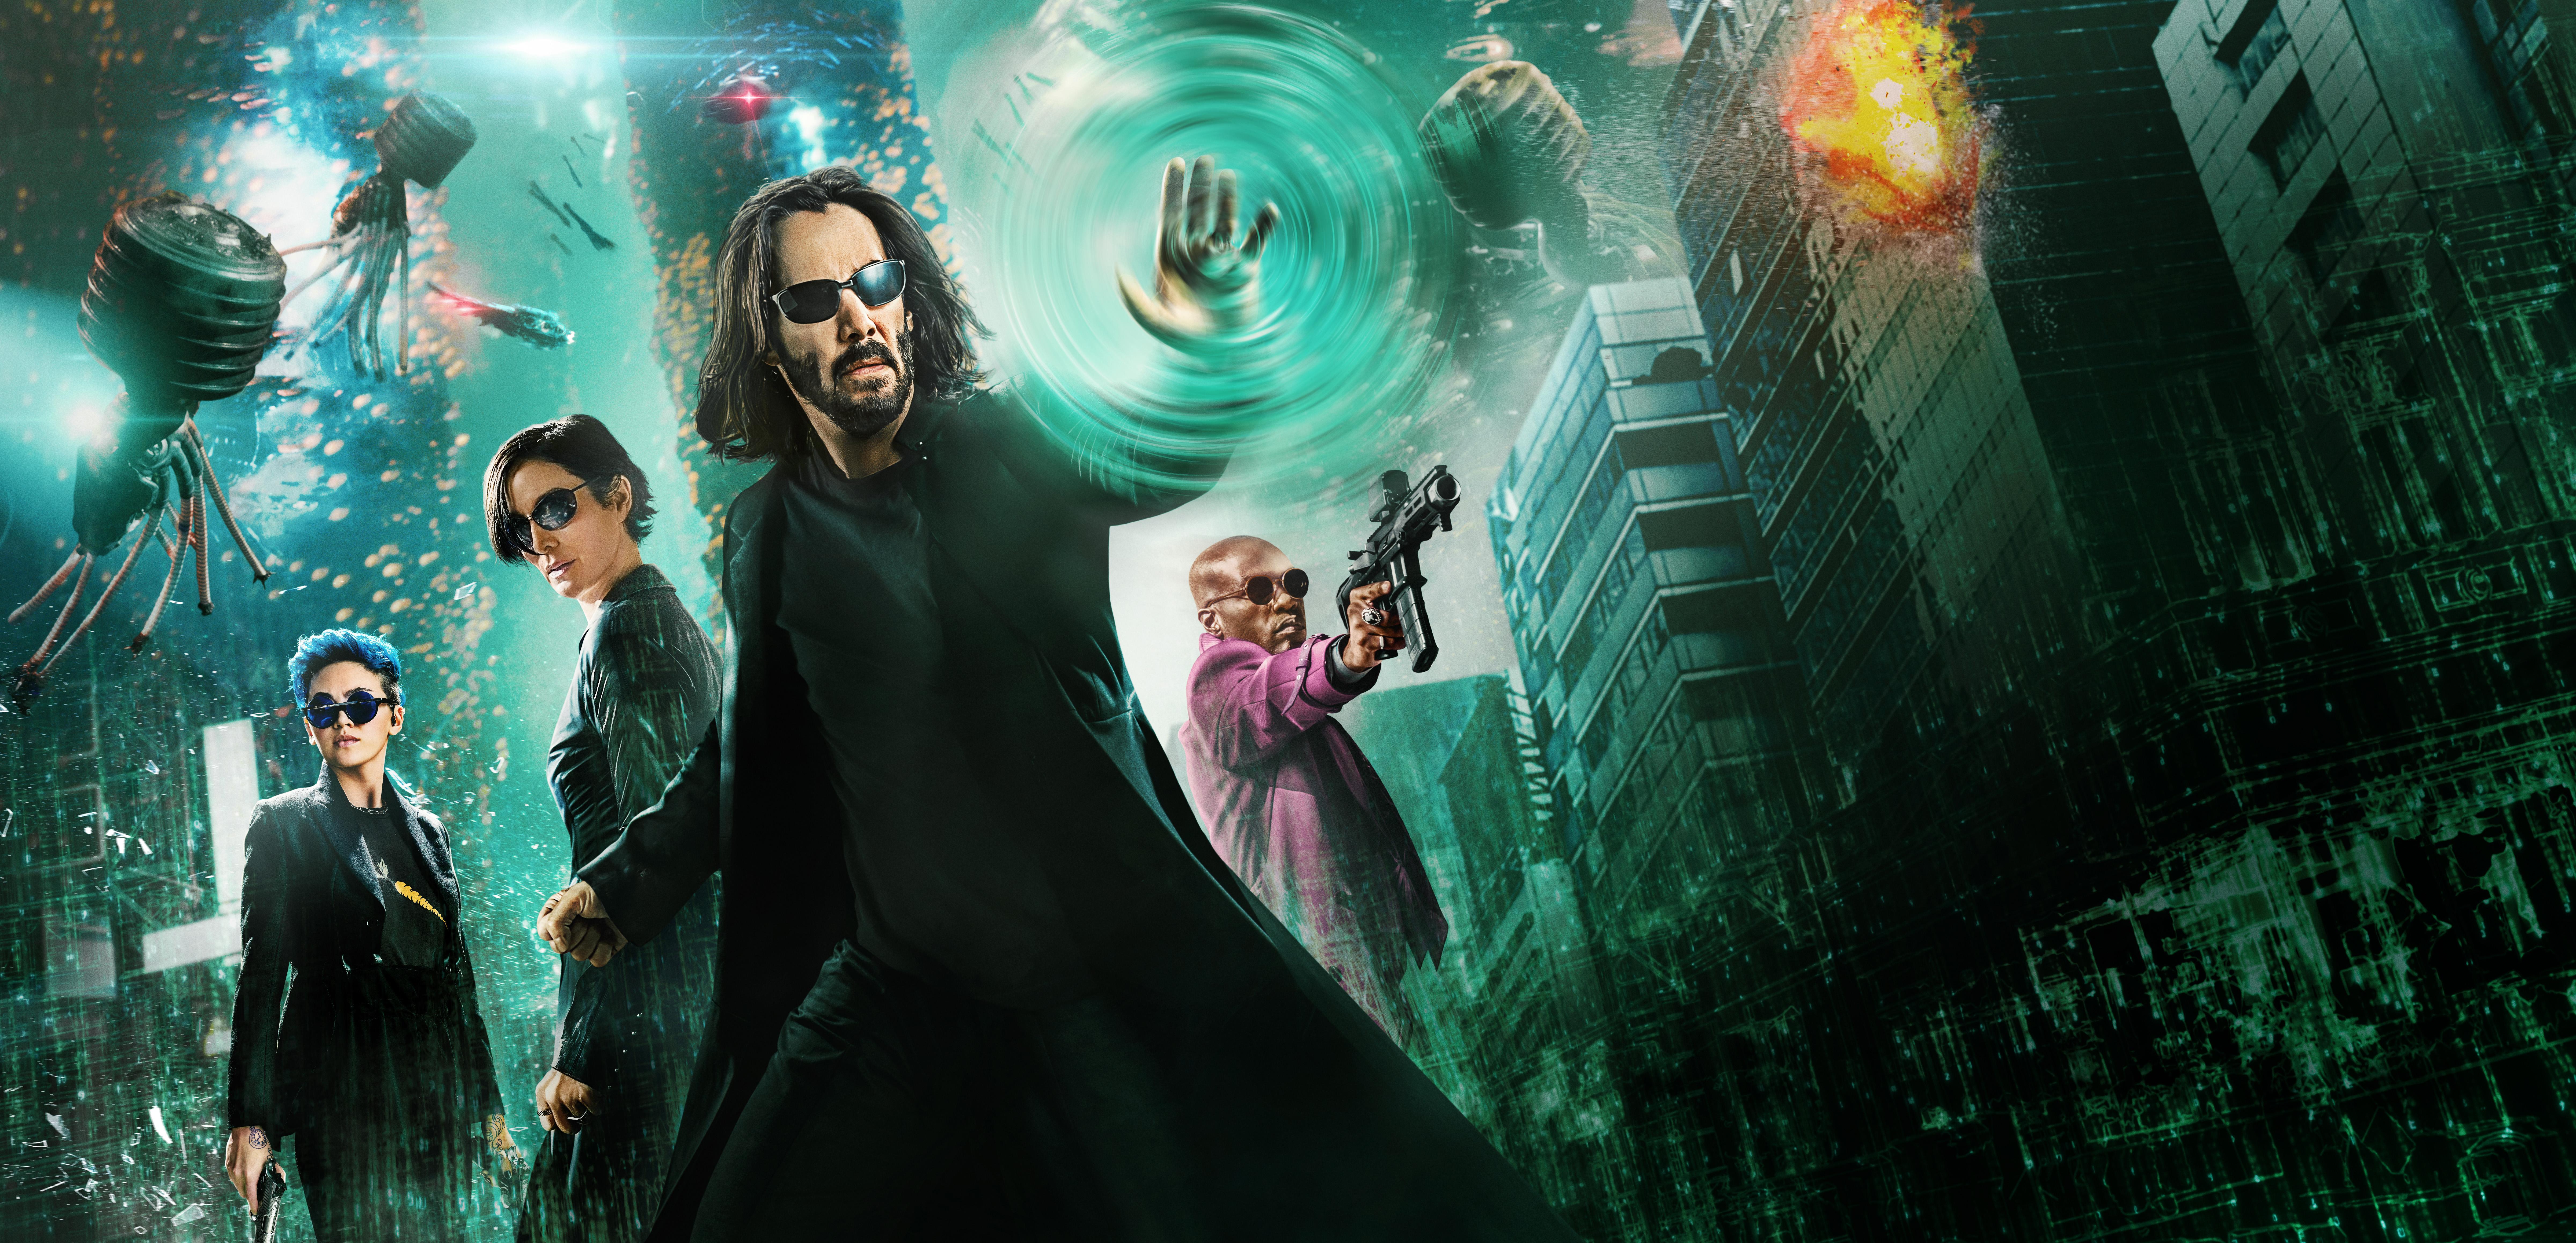 Trinity The Matrix HD Wallpaper And Background